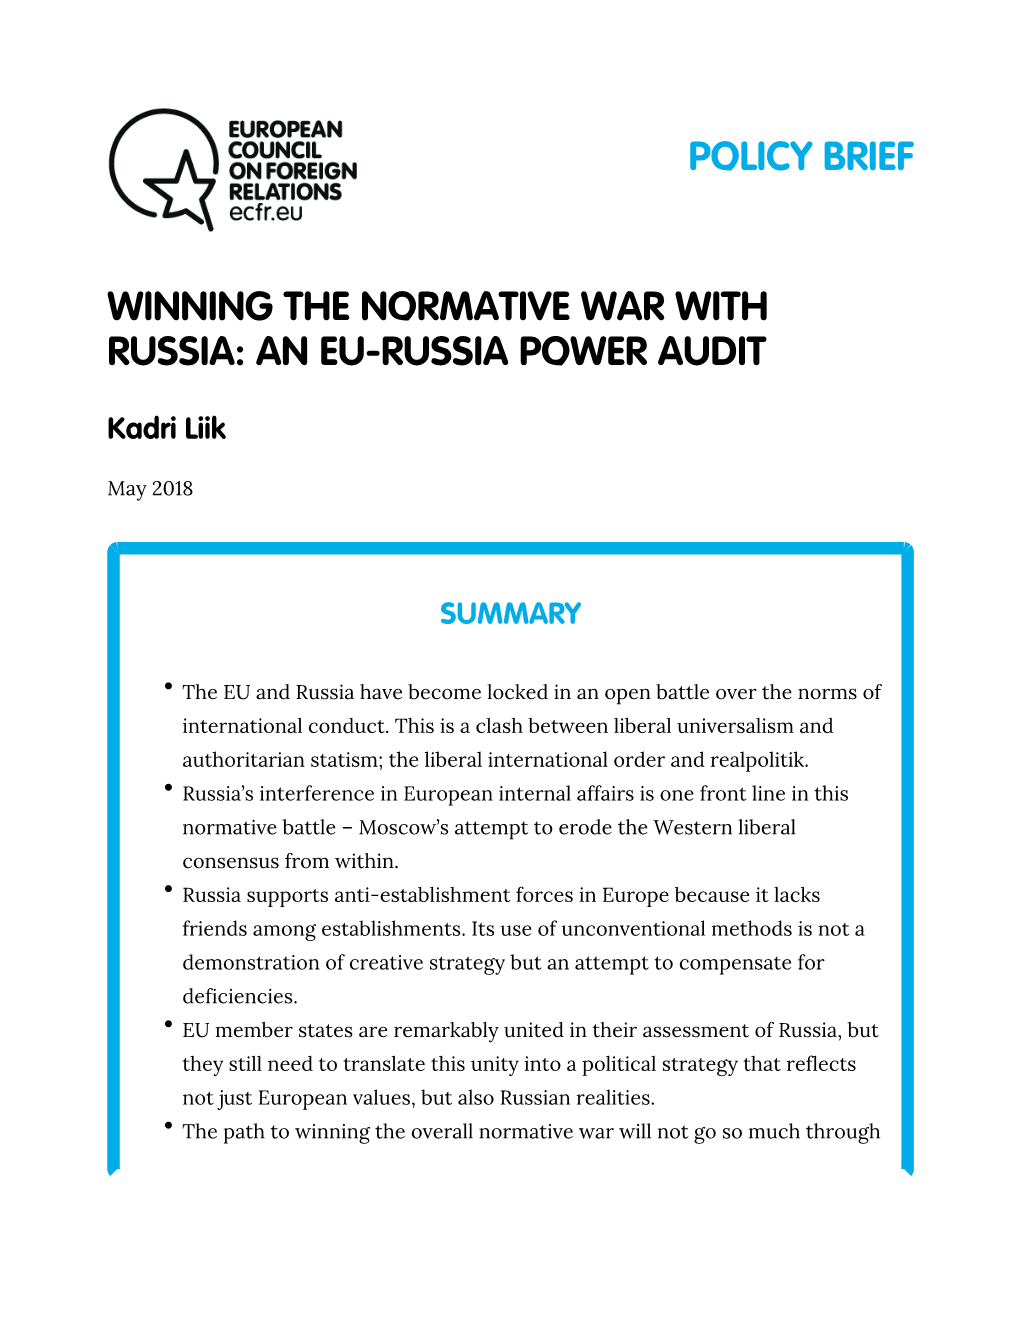 Winning the Normative War with Russia: an Eu-Russia Power Audit